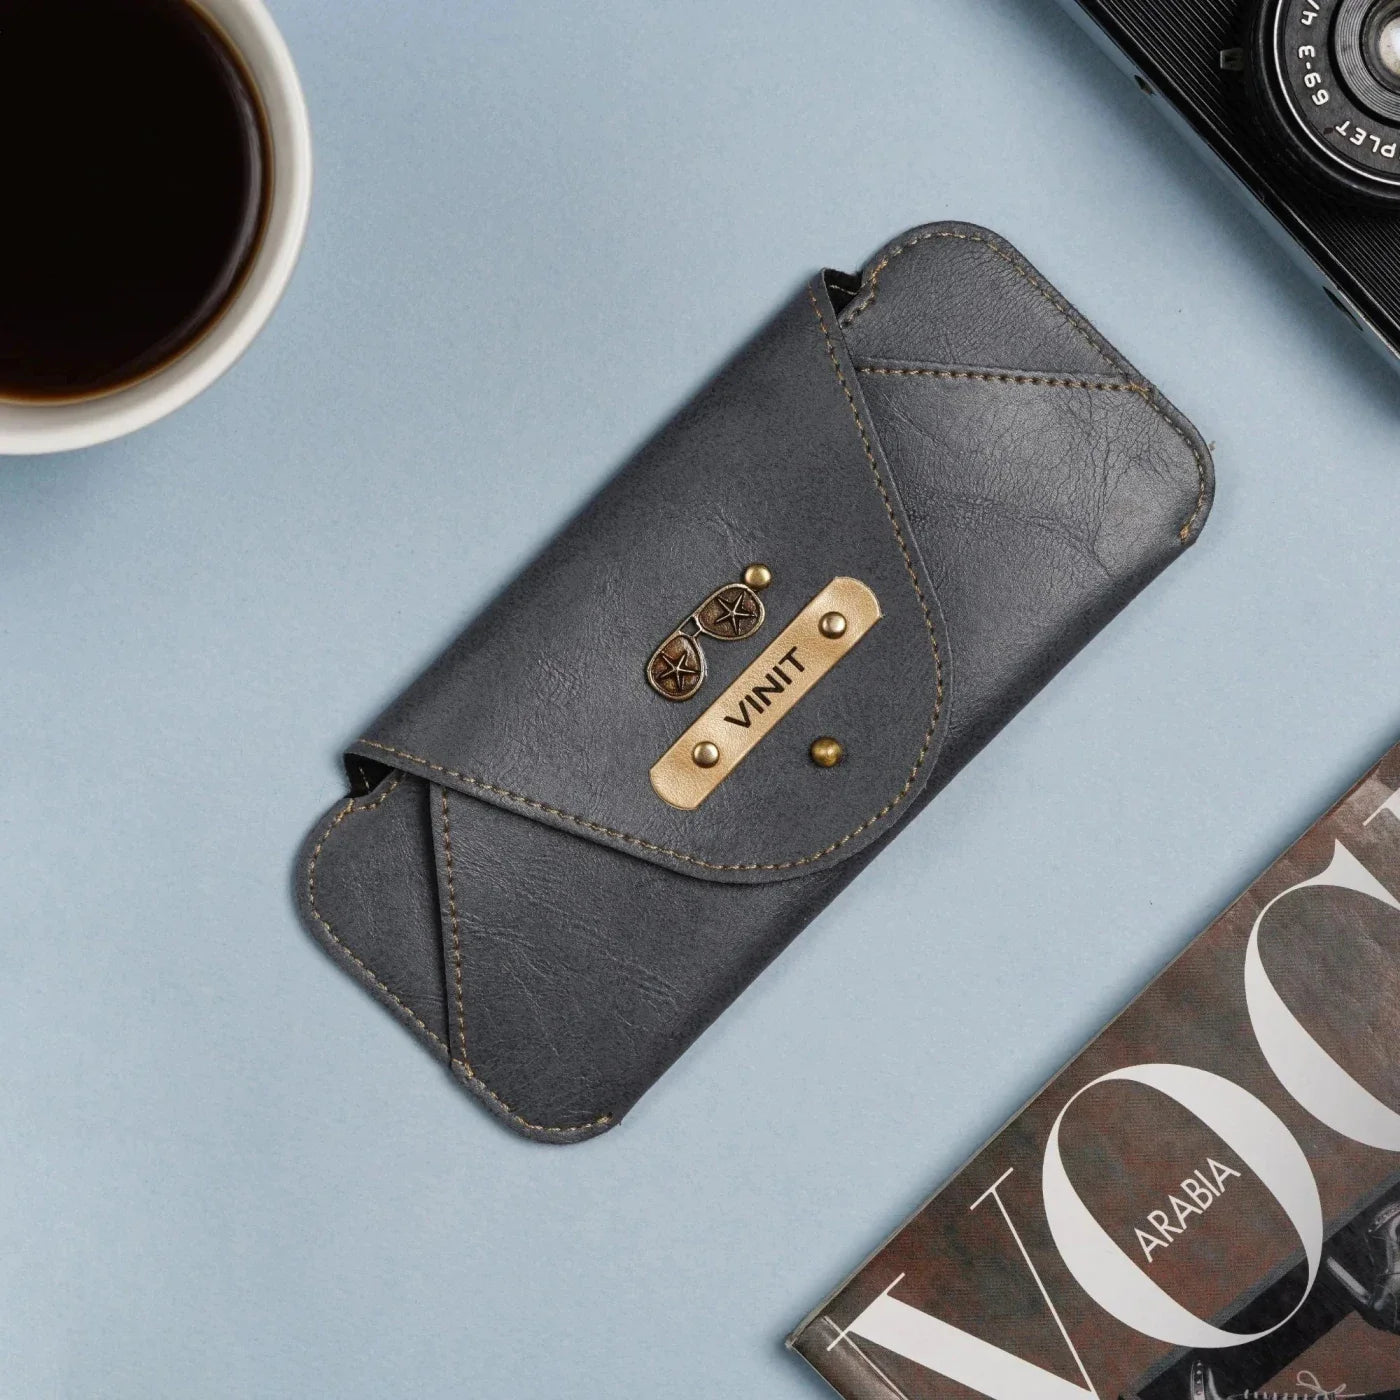 Stand out from the crowd with this one-of-a-kind eyewear case.